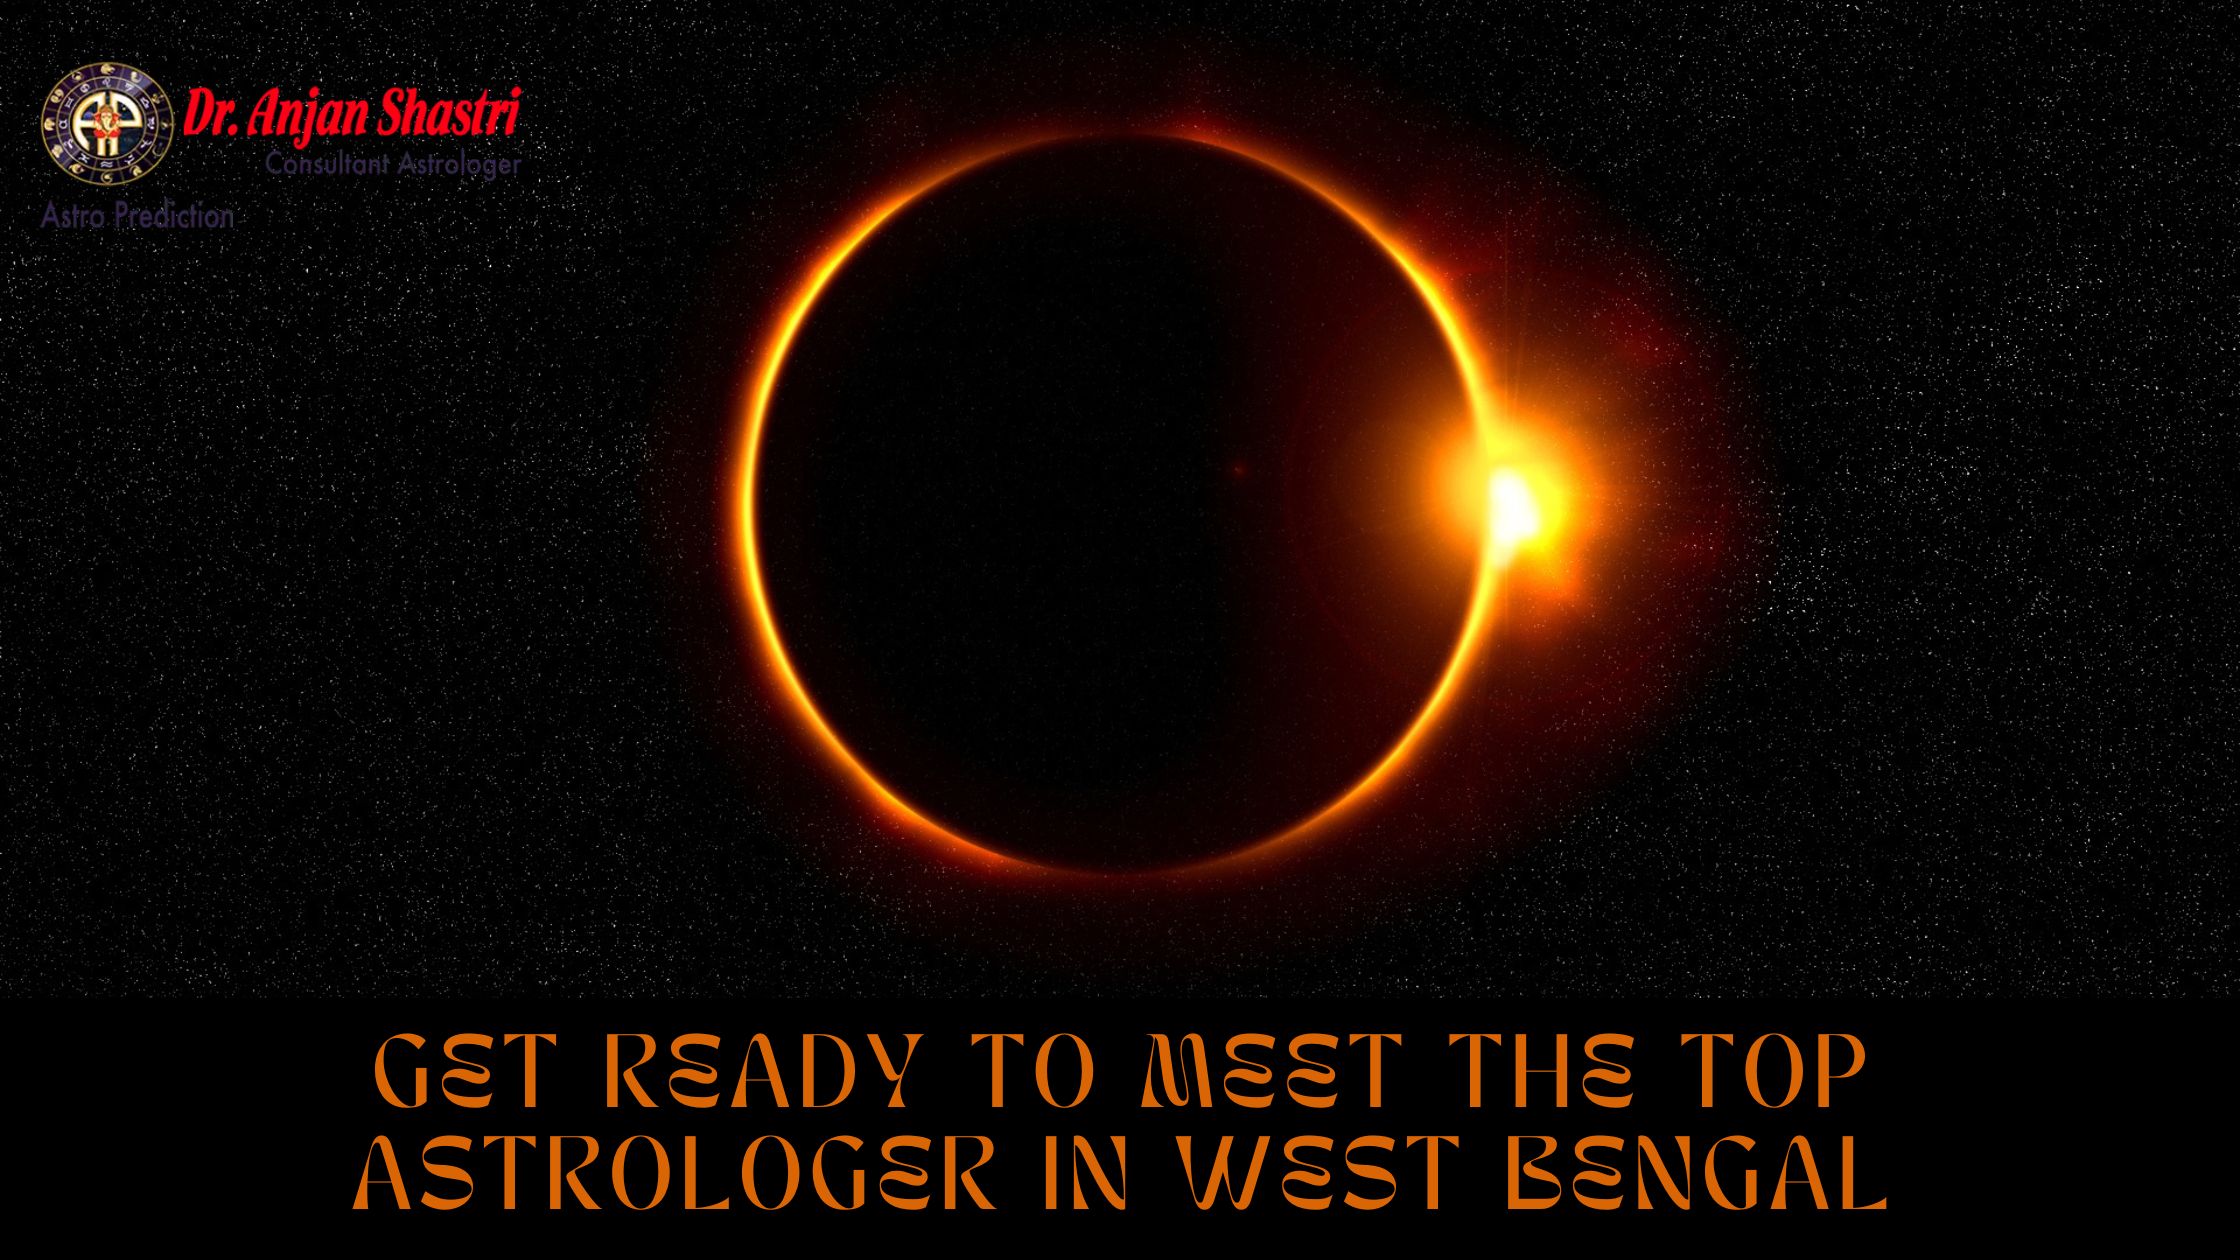 Get Ready to Meet the Top Astrologer in West Bengal